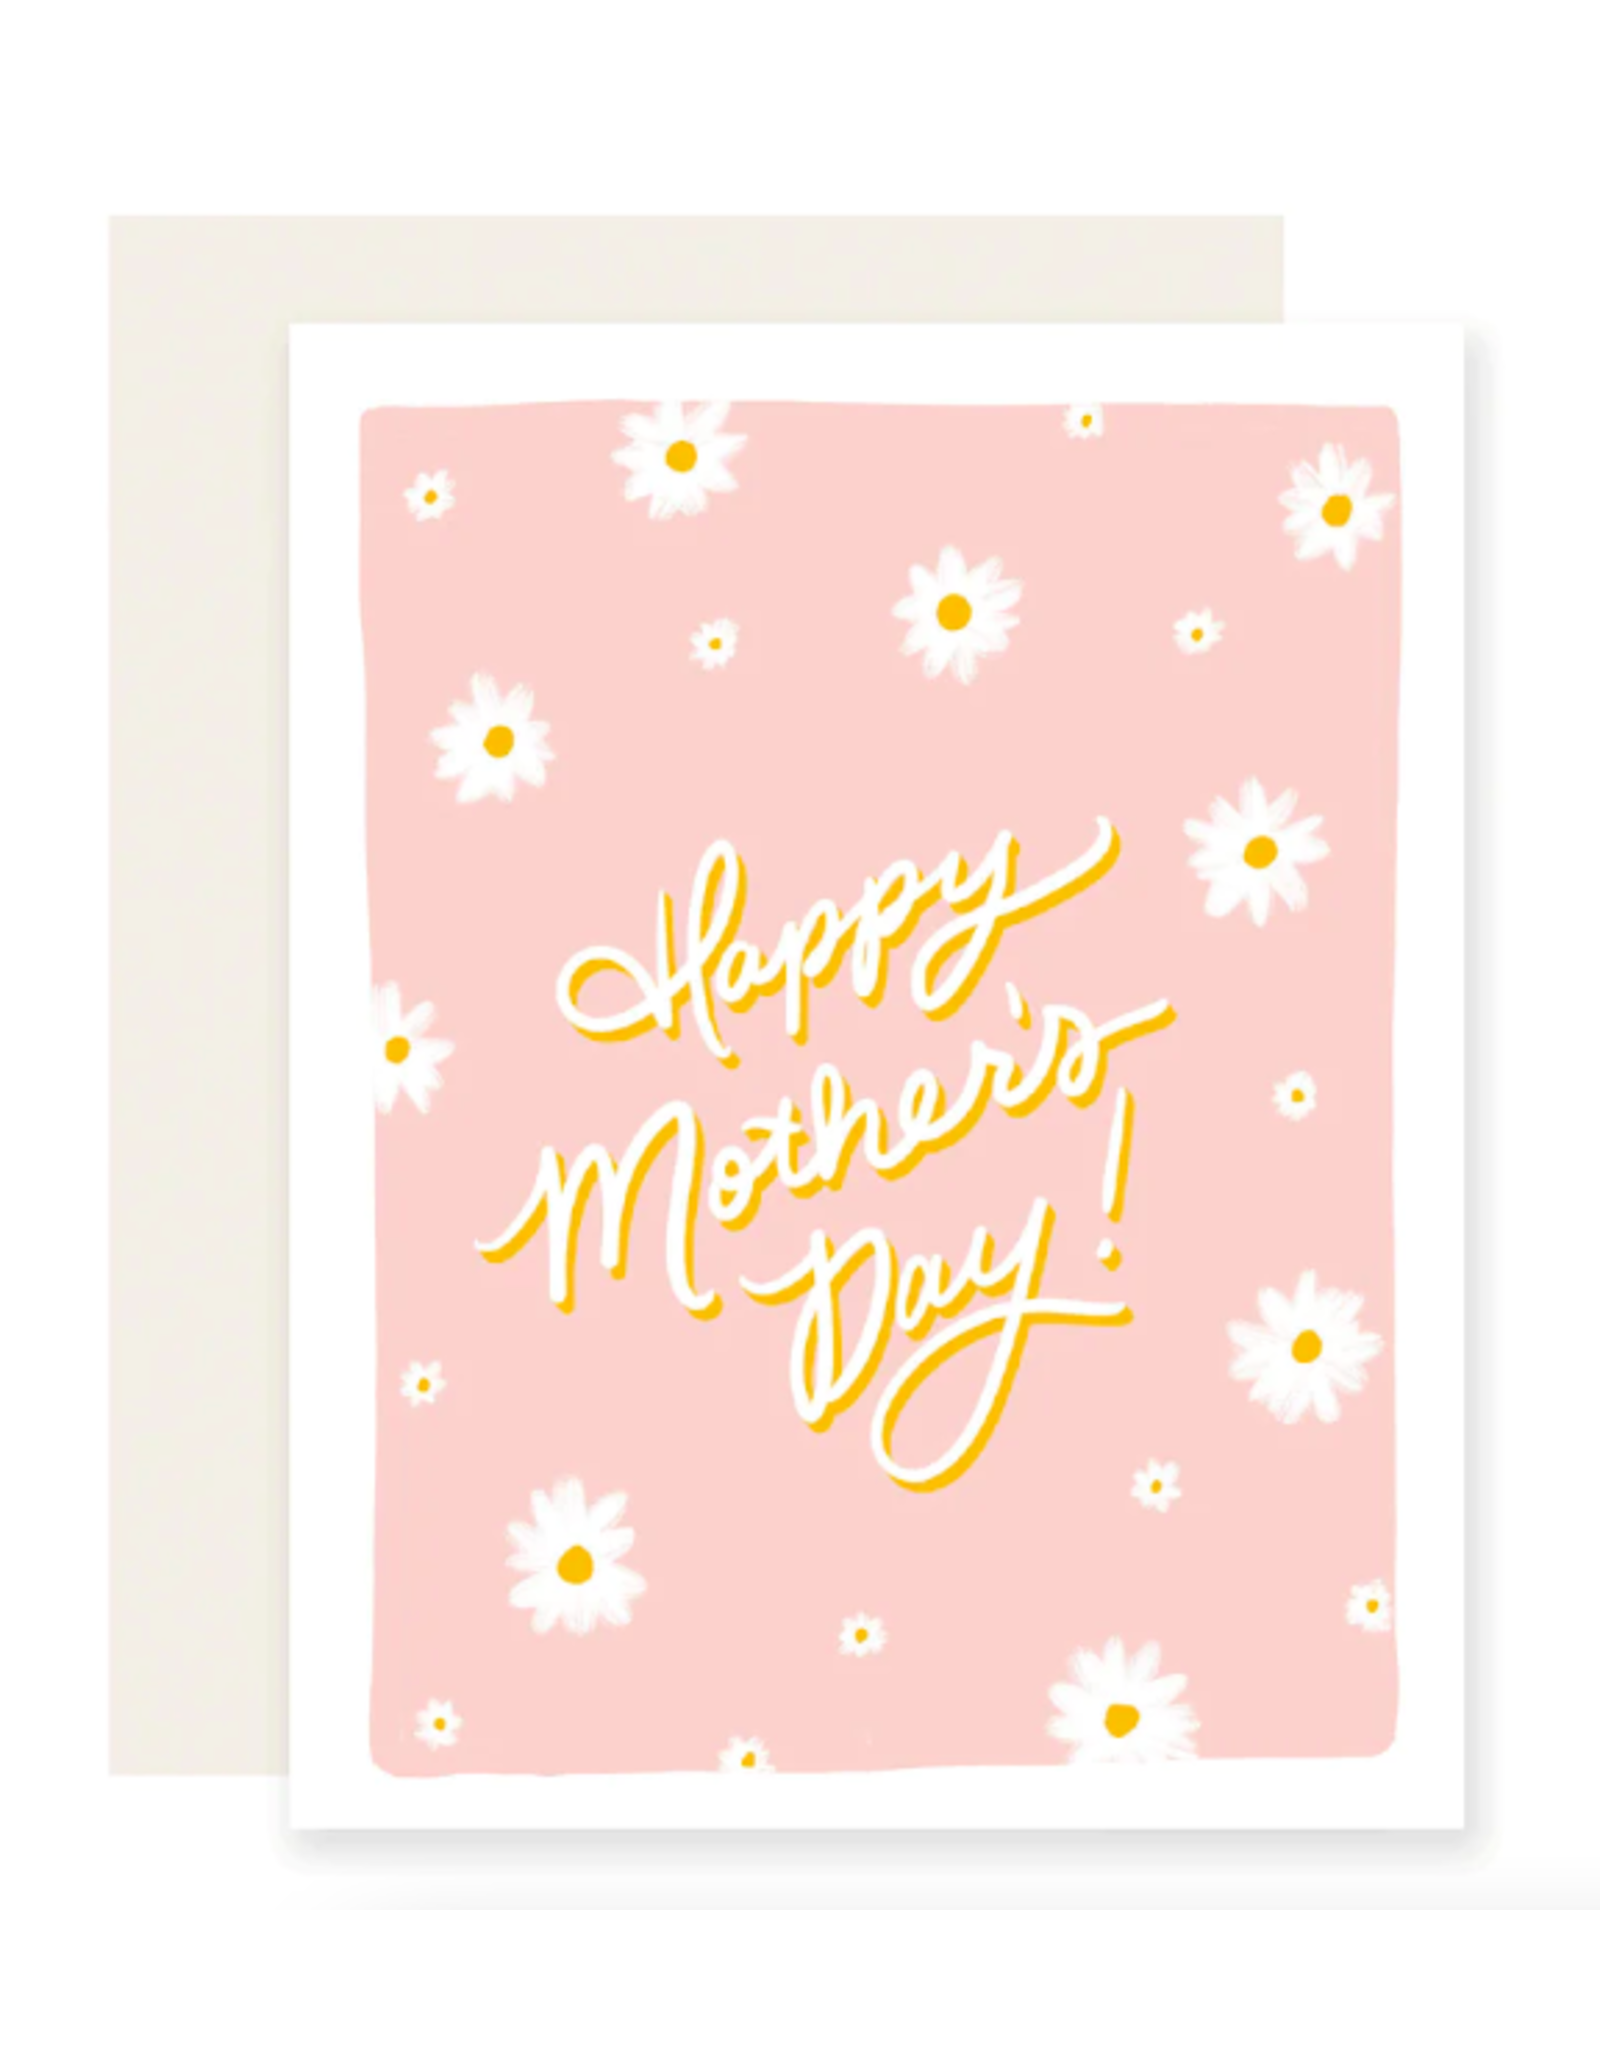 Slightly Stationery Mother's Day Daisies Card